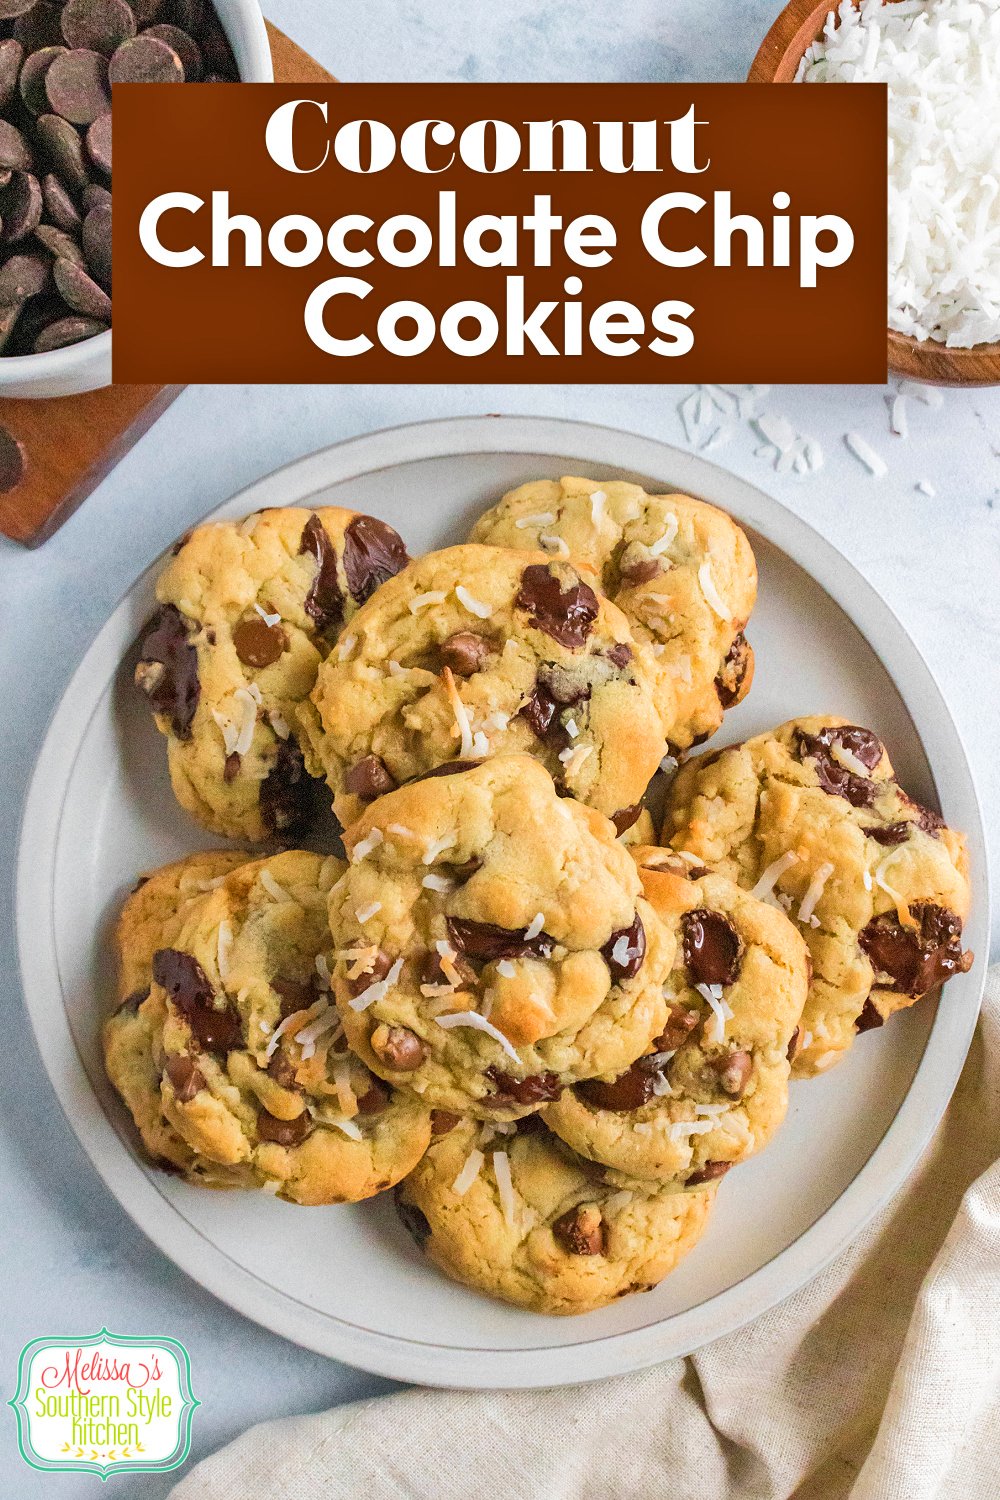 Bake a small batch of Coconut Chocolate Chip Cookies for dessert! #coconutcookies #chocolatechipscookies #coconutchocolatechipcookies #cookierecipes #holidaybaking #christmascookies via @melissasssk